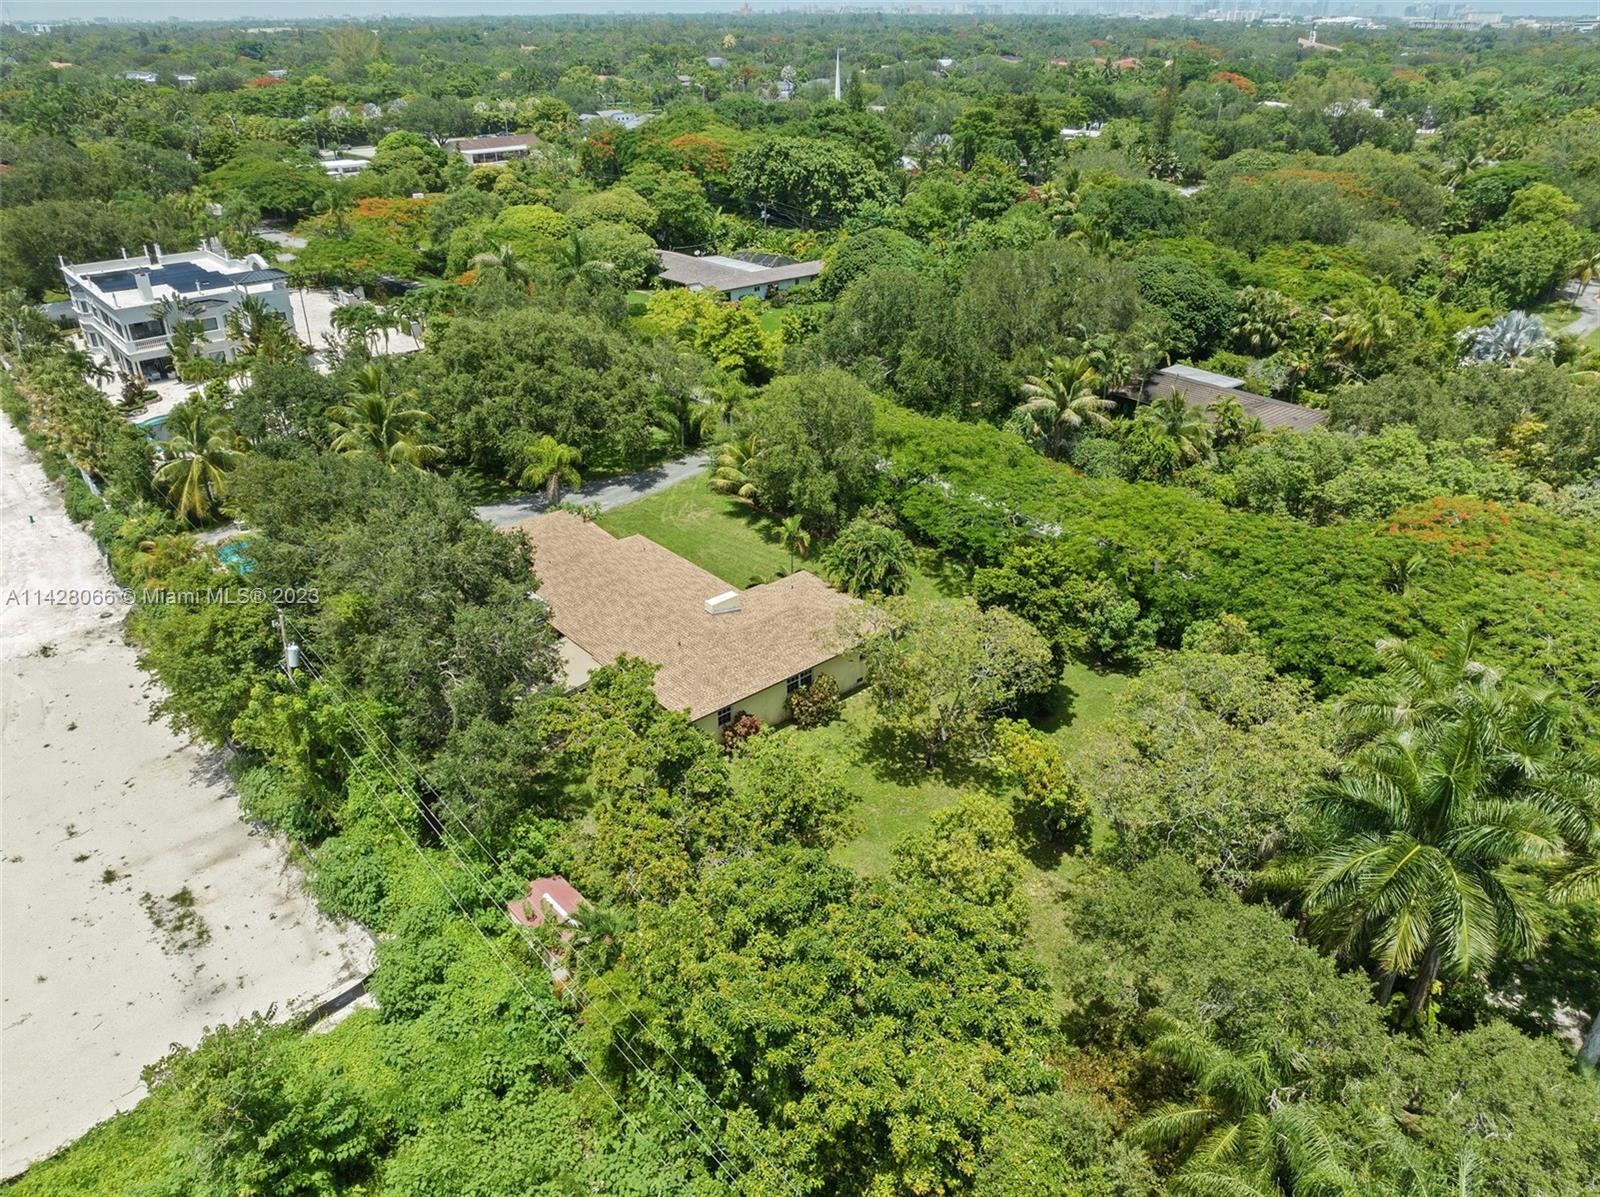 Rare opportunity to renovate or build your dream home in one of Miami’s most sought after and desirable neighborhoods. With almost a builder’s acre, you’ll have the flexibility to create your own paradise, while being centrally located next to the very best Miami has to offer. Positioned on a private and secluded street, and within a well-established and affluent community, this property will retain and only continue to appreciate in value. Just minutes to Miami’s major expressways, Enjoy quick and easy access to world-class shopping dining and entertainment in one of the world's most cultural and cosmopolitan cities. Don’t miss this opportunity to create something truly special that will last you a lifetime!